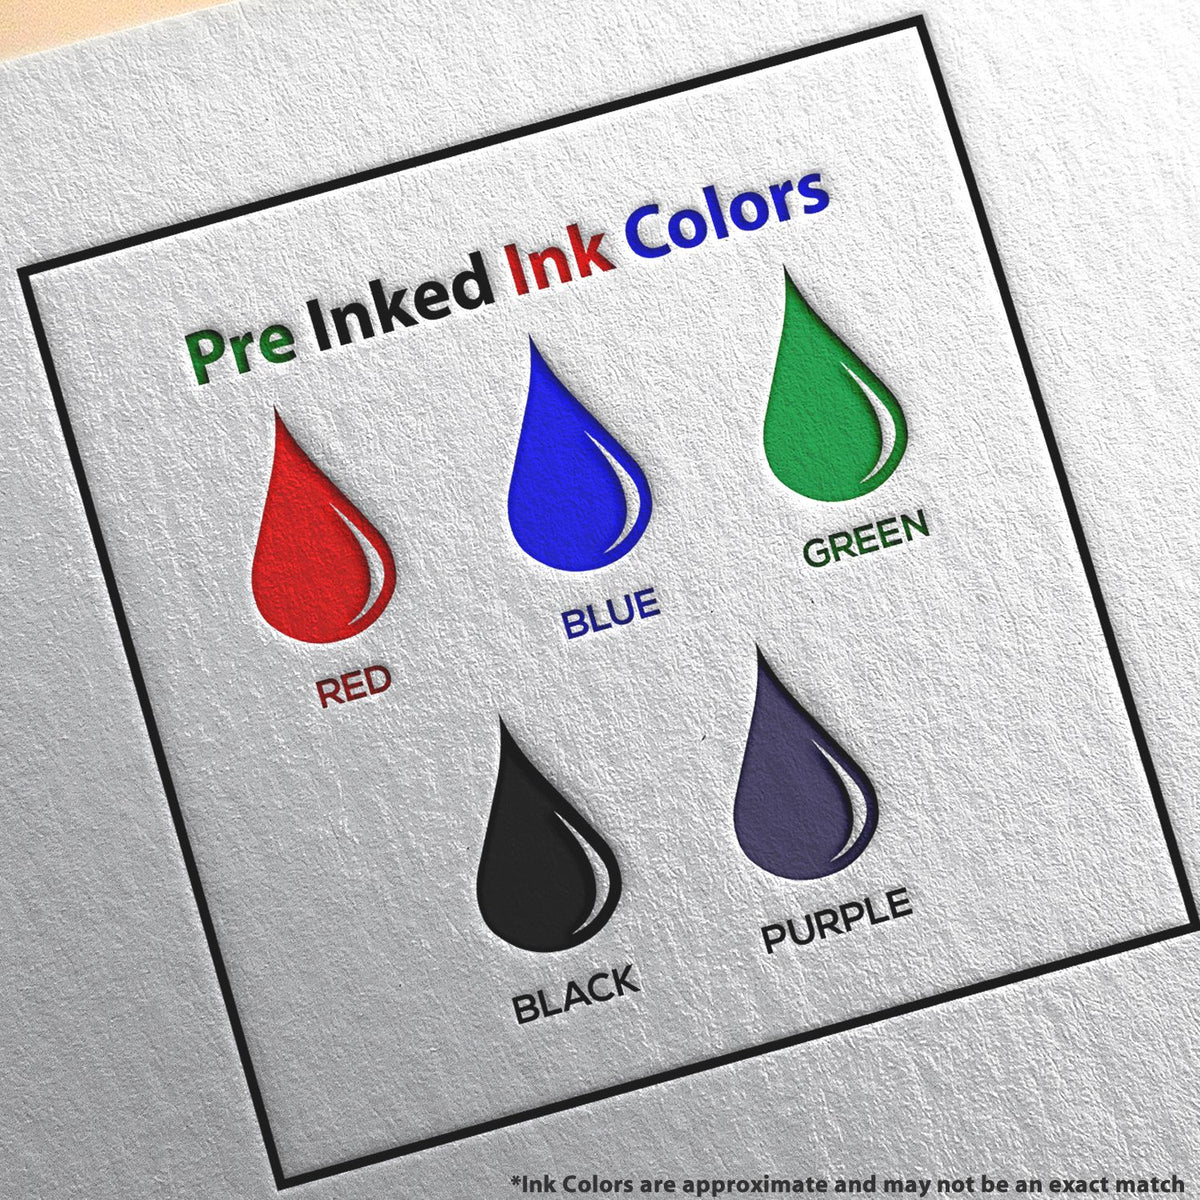 A picture showing the different ink colors or hues available for the Slim Pre-Inked Rectangular Notary Stamp for Illinois product.